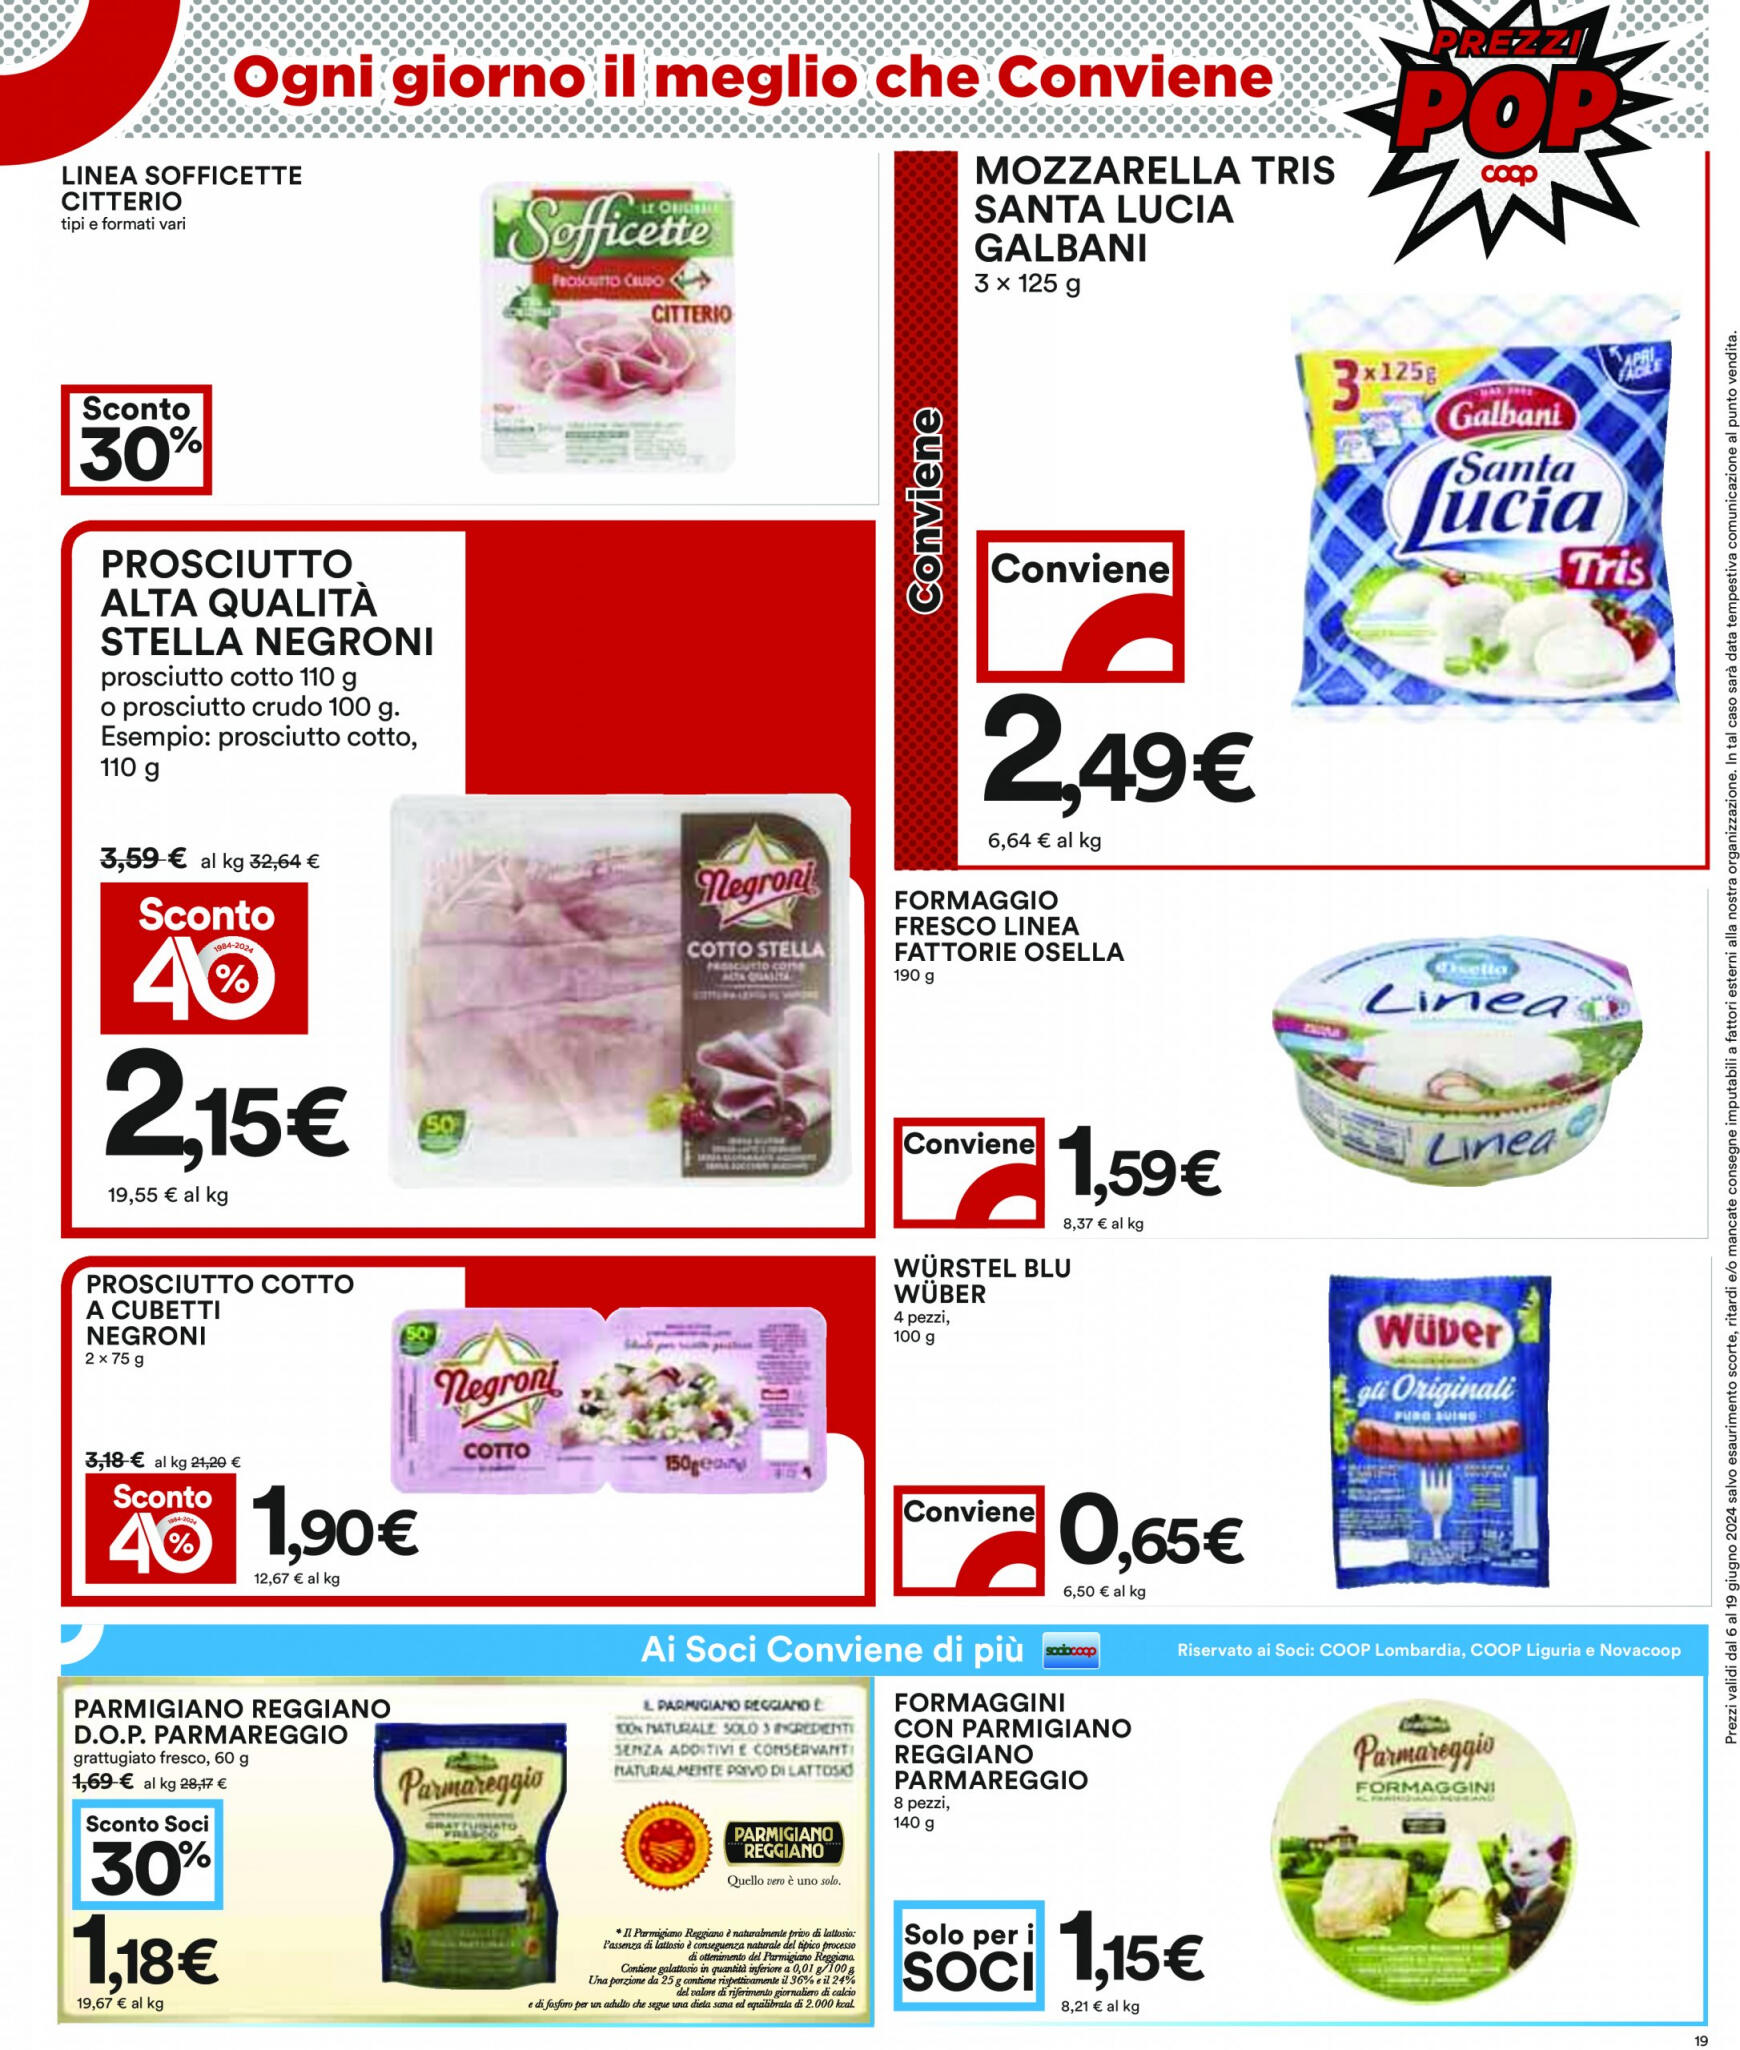 coop - Nuovo volantino Coop 10.06. - 19.06. - page: 19